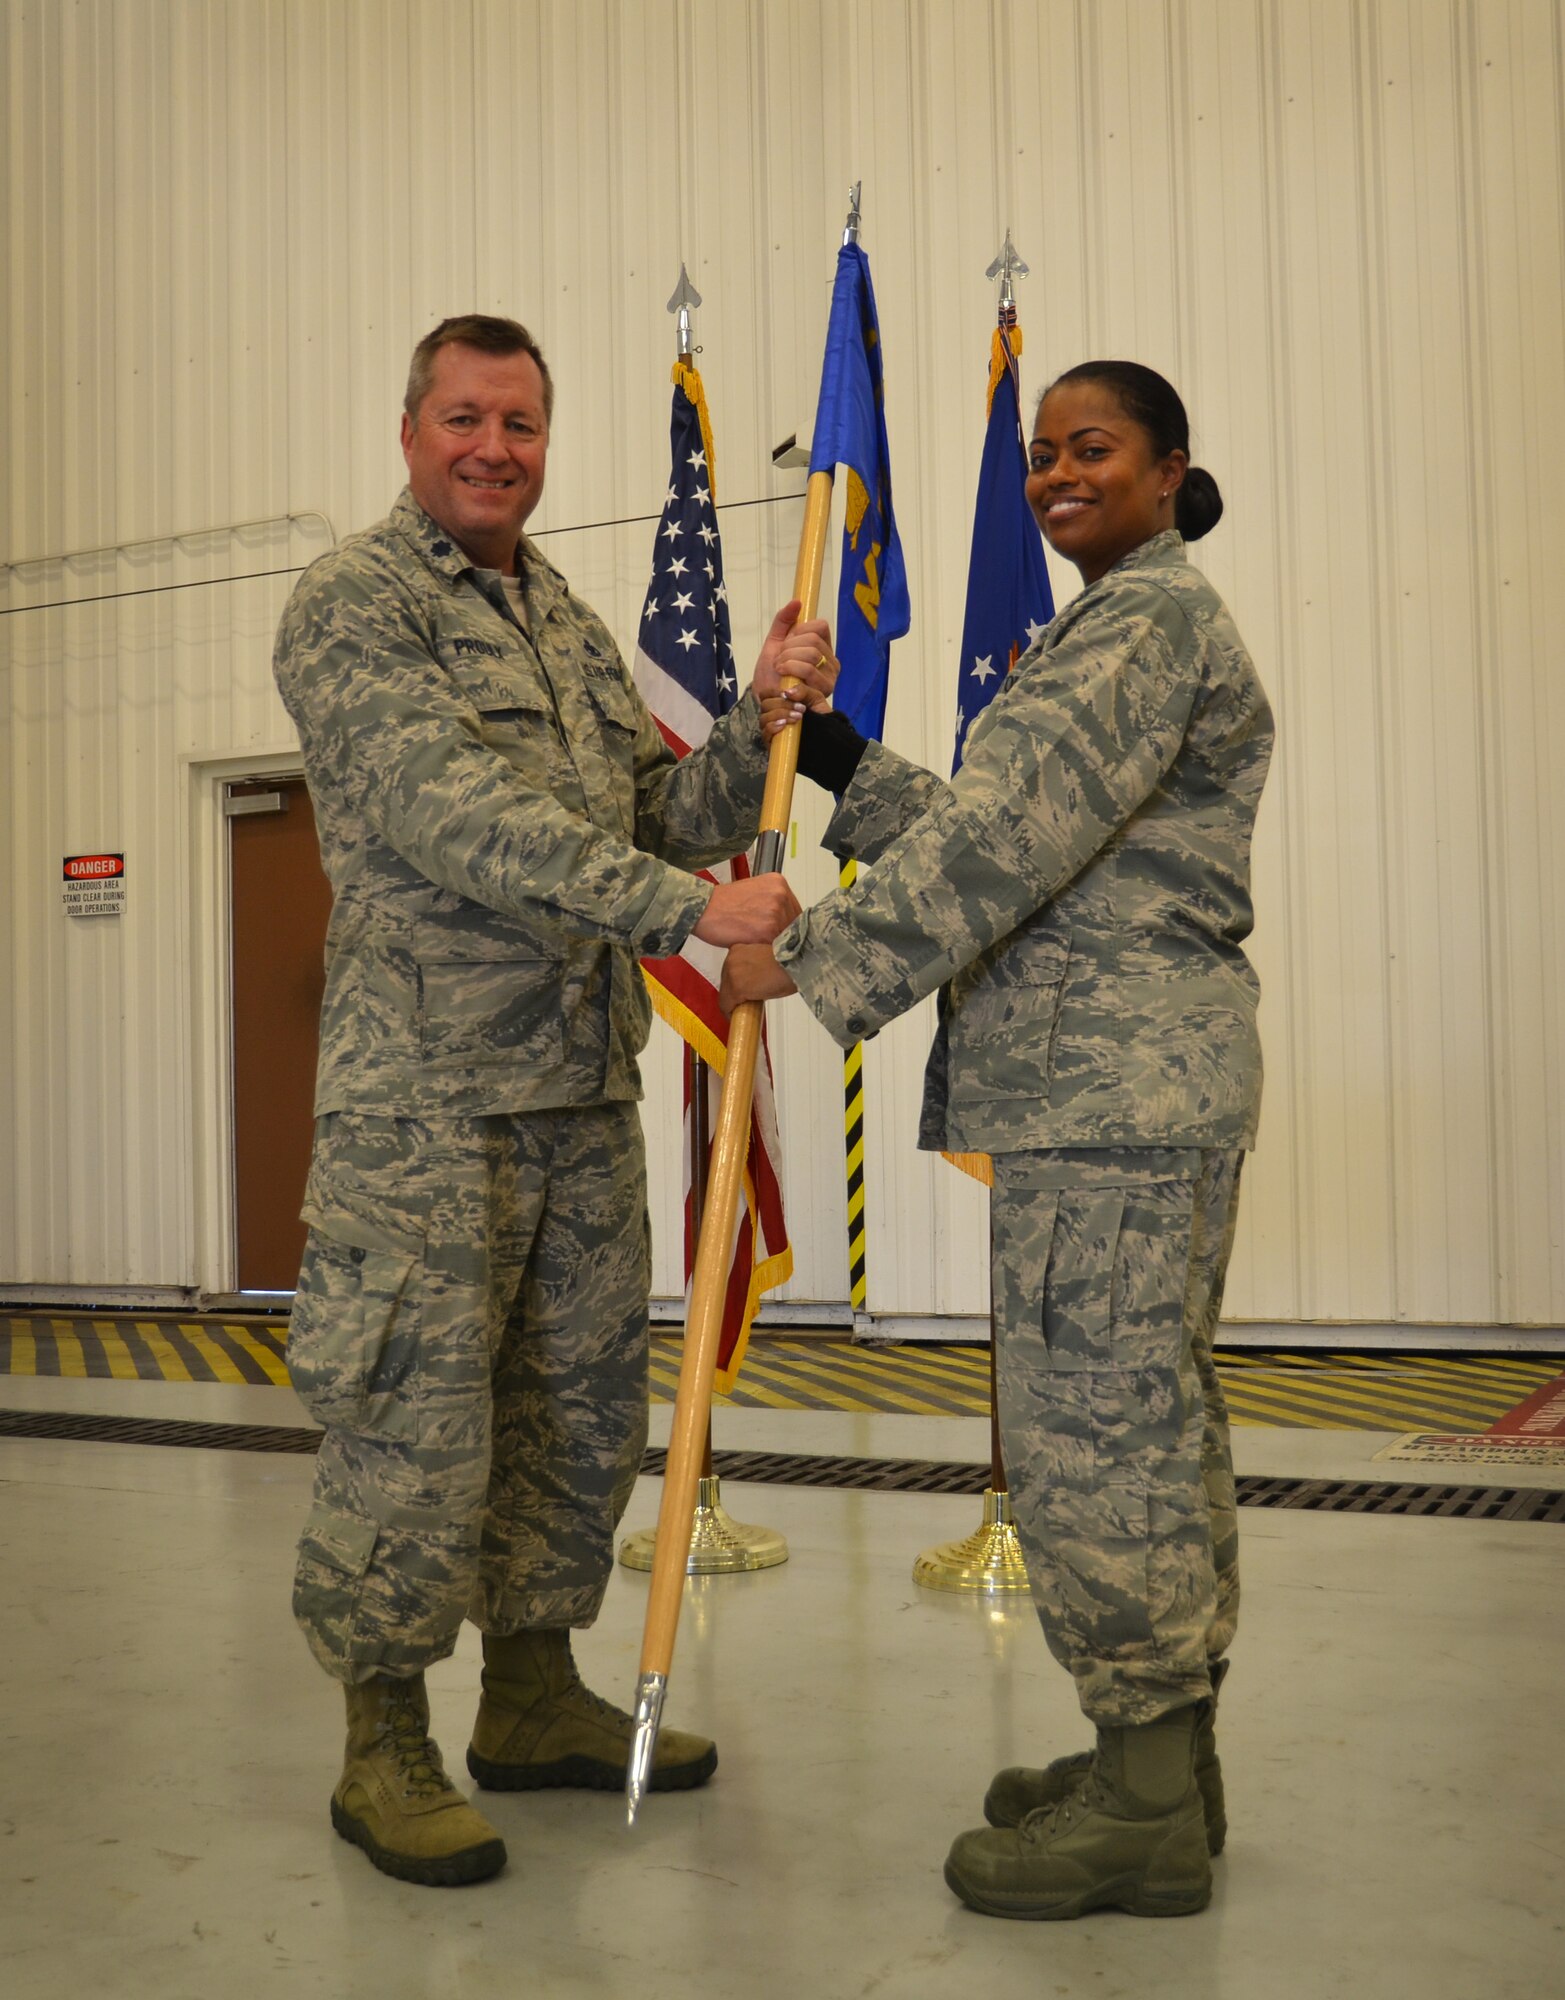 Maj. Katrina Jones assumes command of the 94th Maintenance Squadron during a change of command ceremony on August 5, 2018 at Dobbins Air Reserve Base. The 94th MXS guide on flag is exchanged from group commander to new unit commander to symbolize the assumption of leadership.  (U.S. Air Force photo by Senior Airman Lauren Douglas)